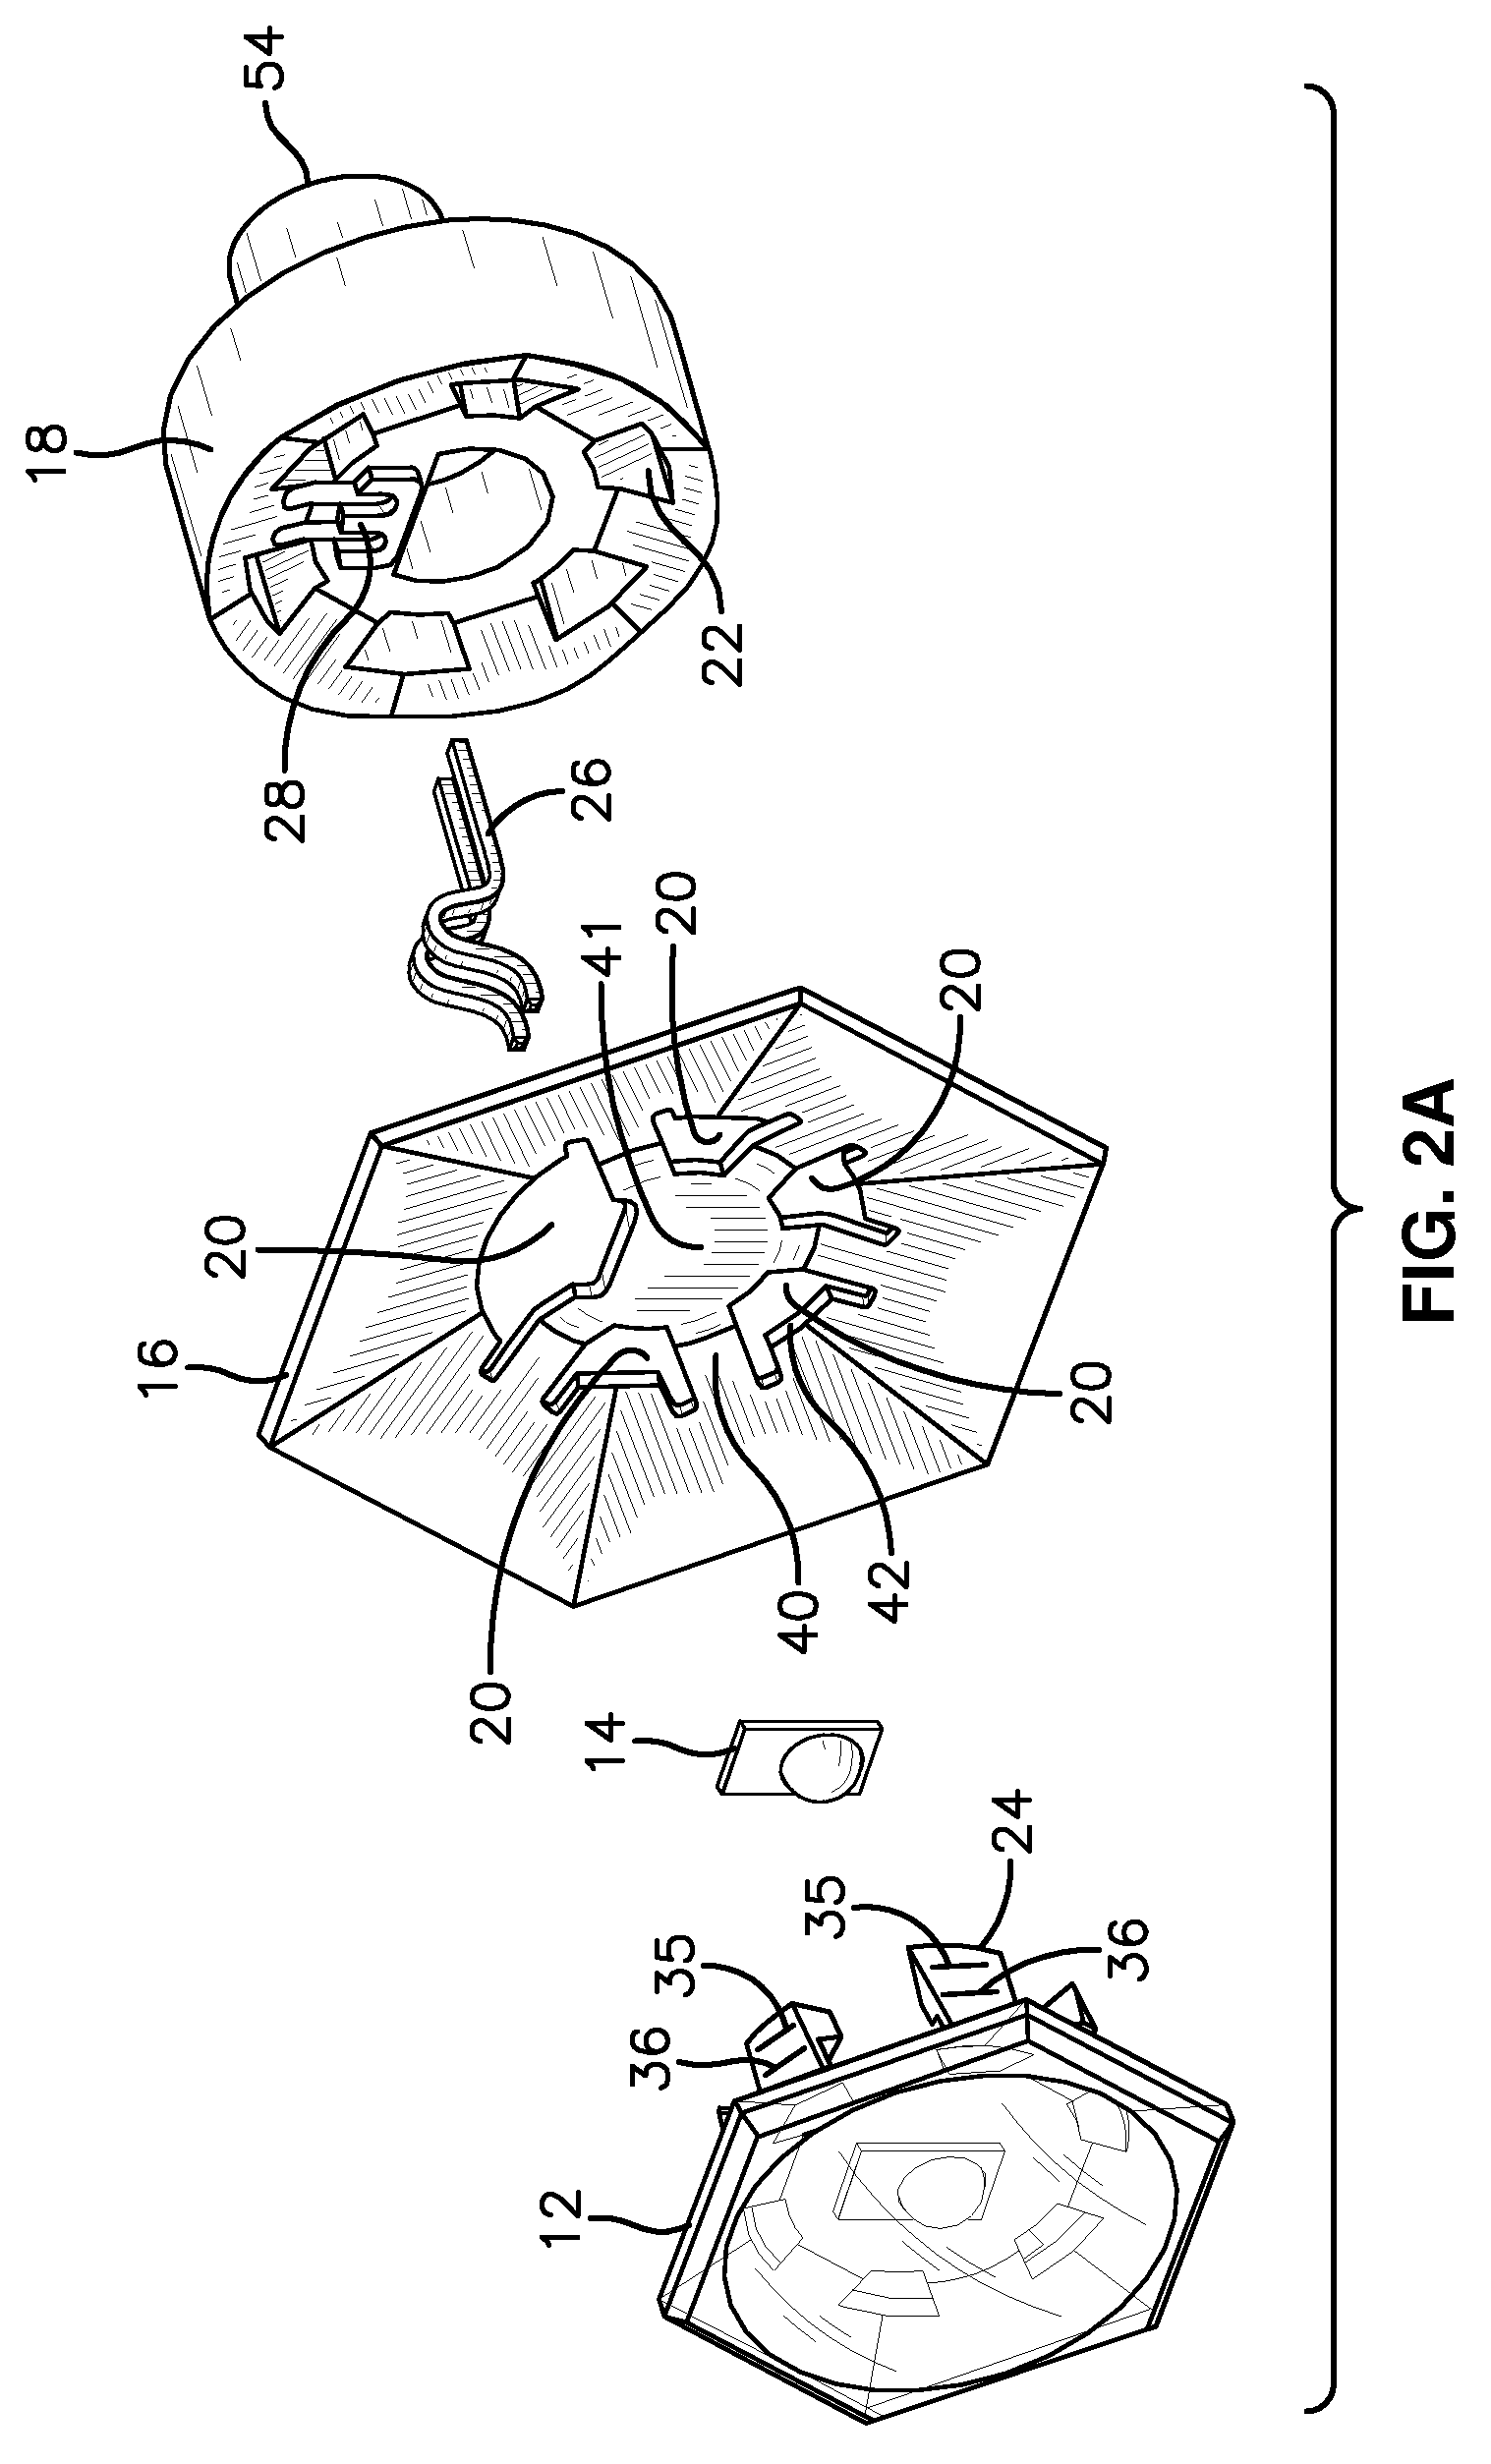 Connector assembly for termination of miniature electronics